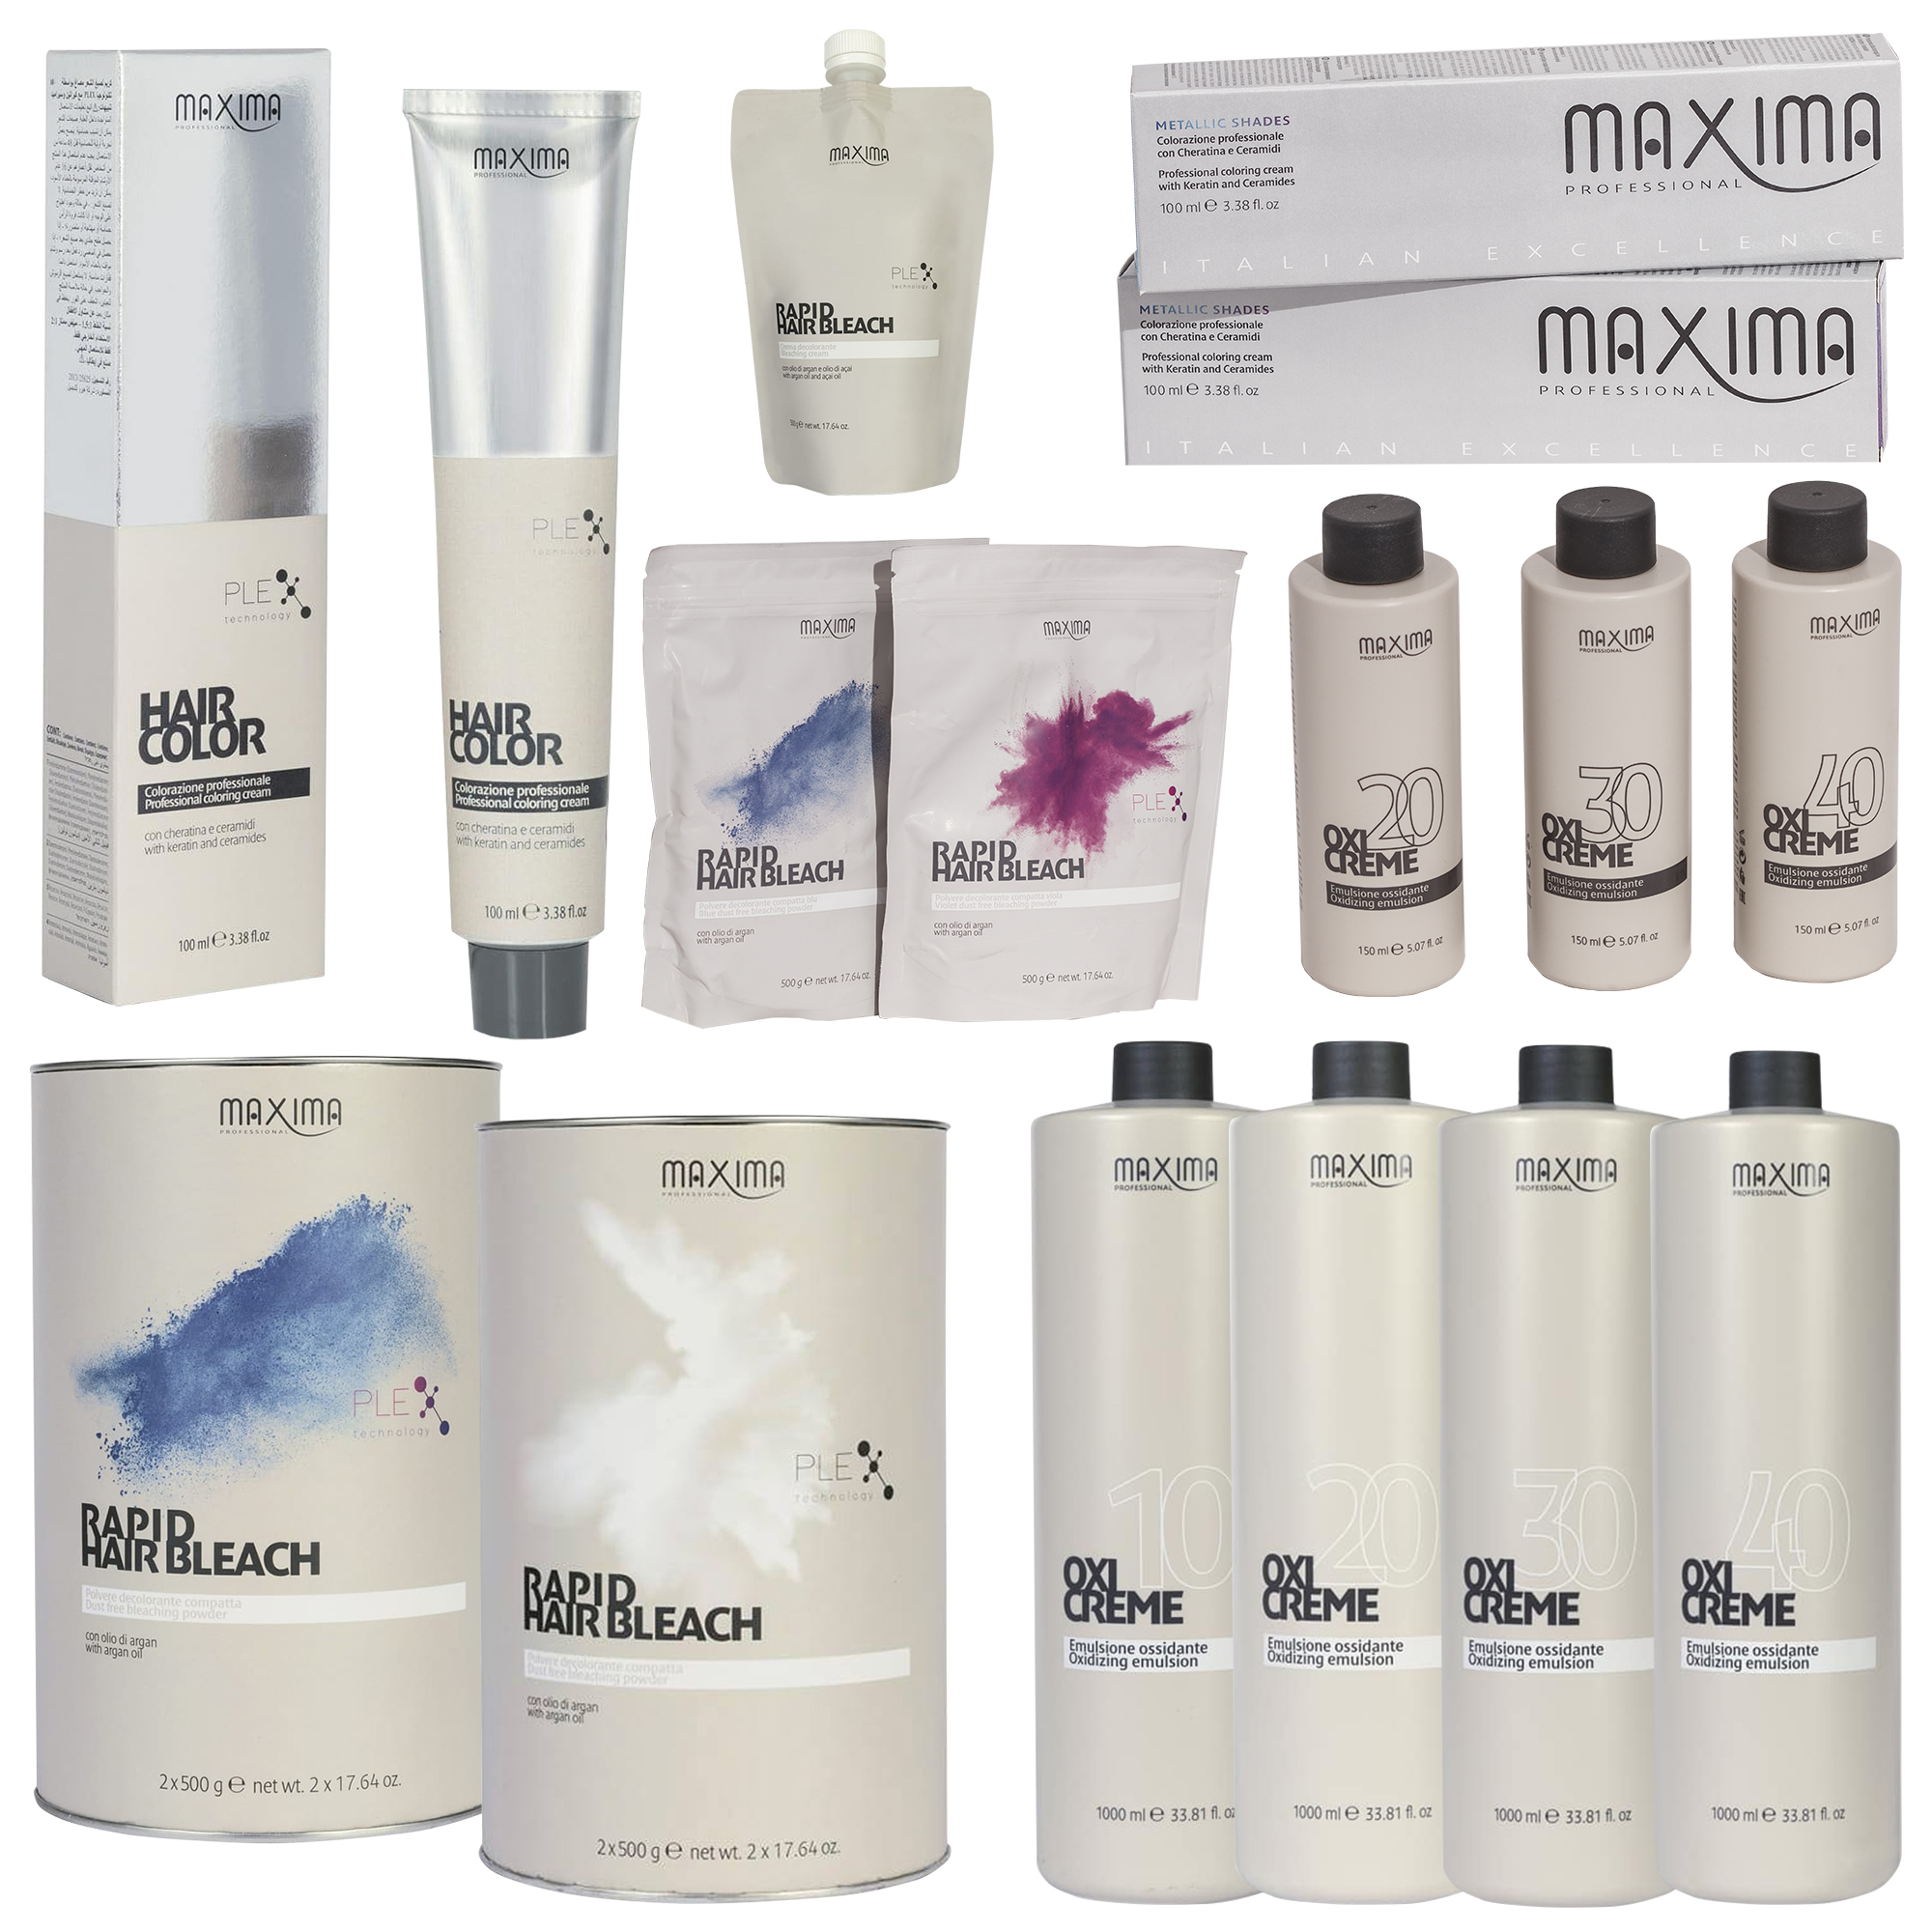 Cosmetic SPA/HAIRDRESSING PRODUCTS/Professional Hair Colour Dye, Bleach & Accessories